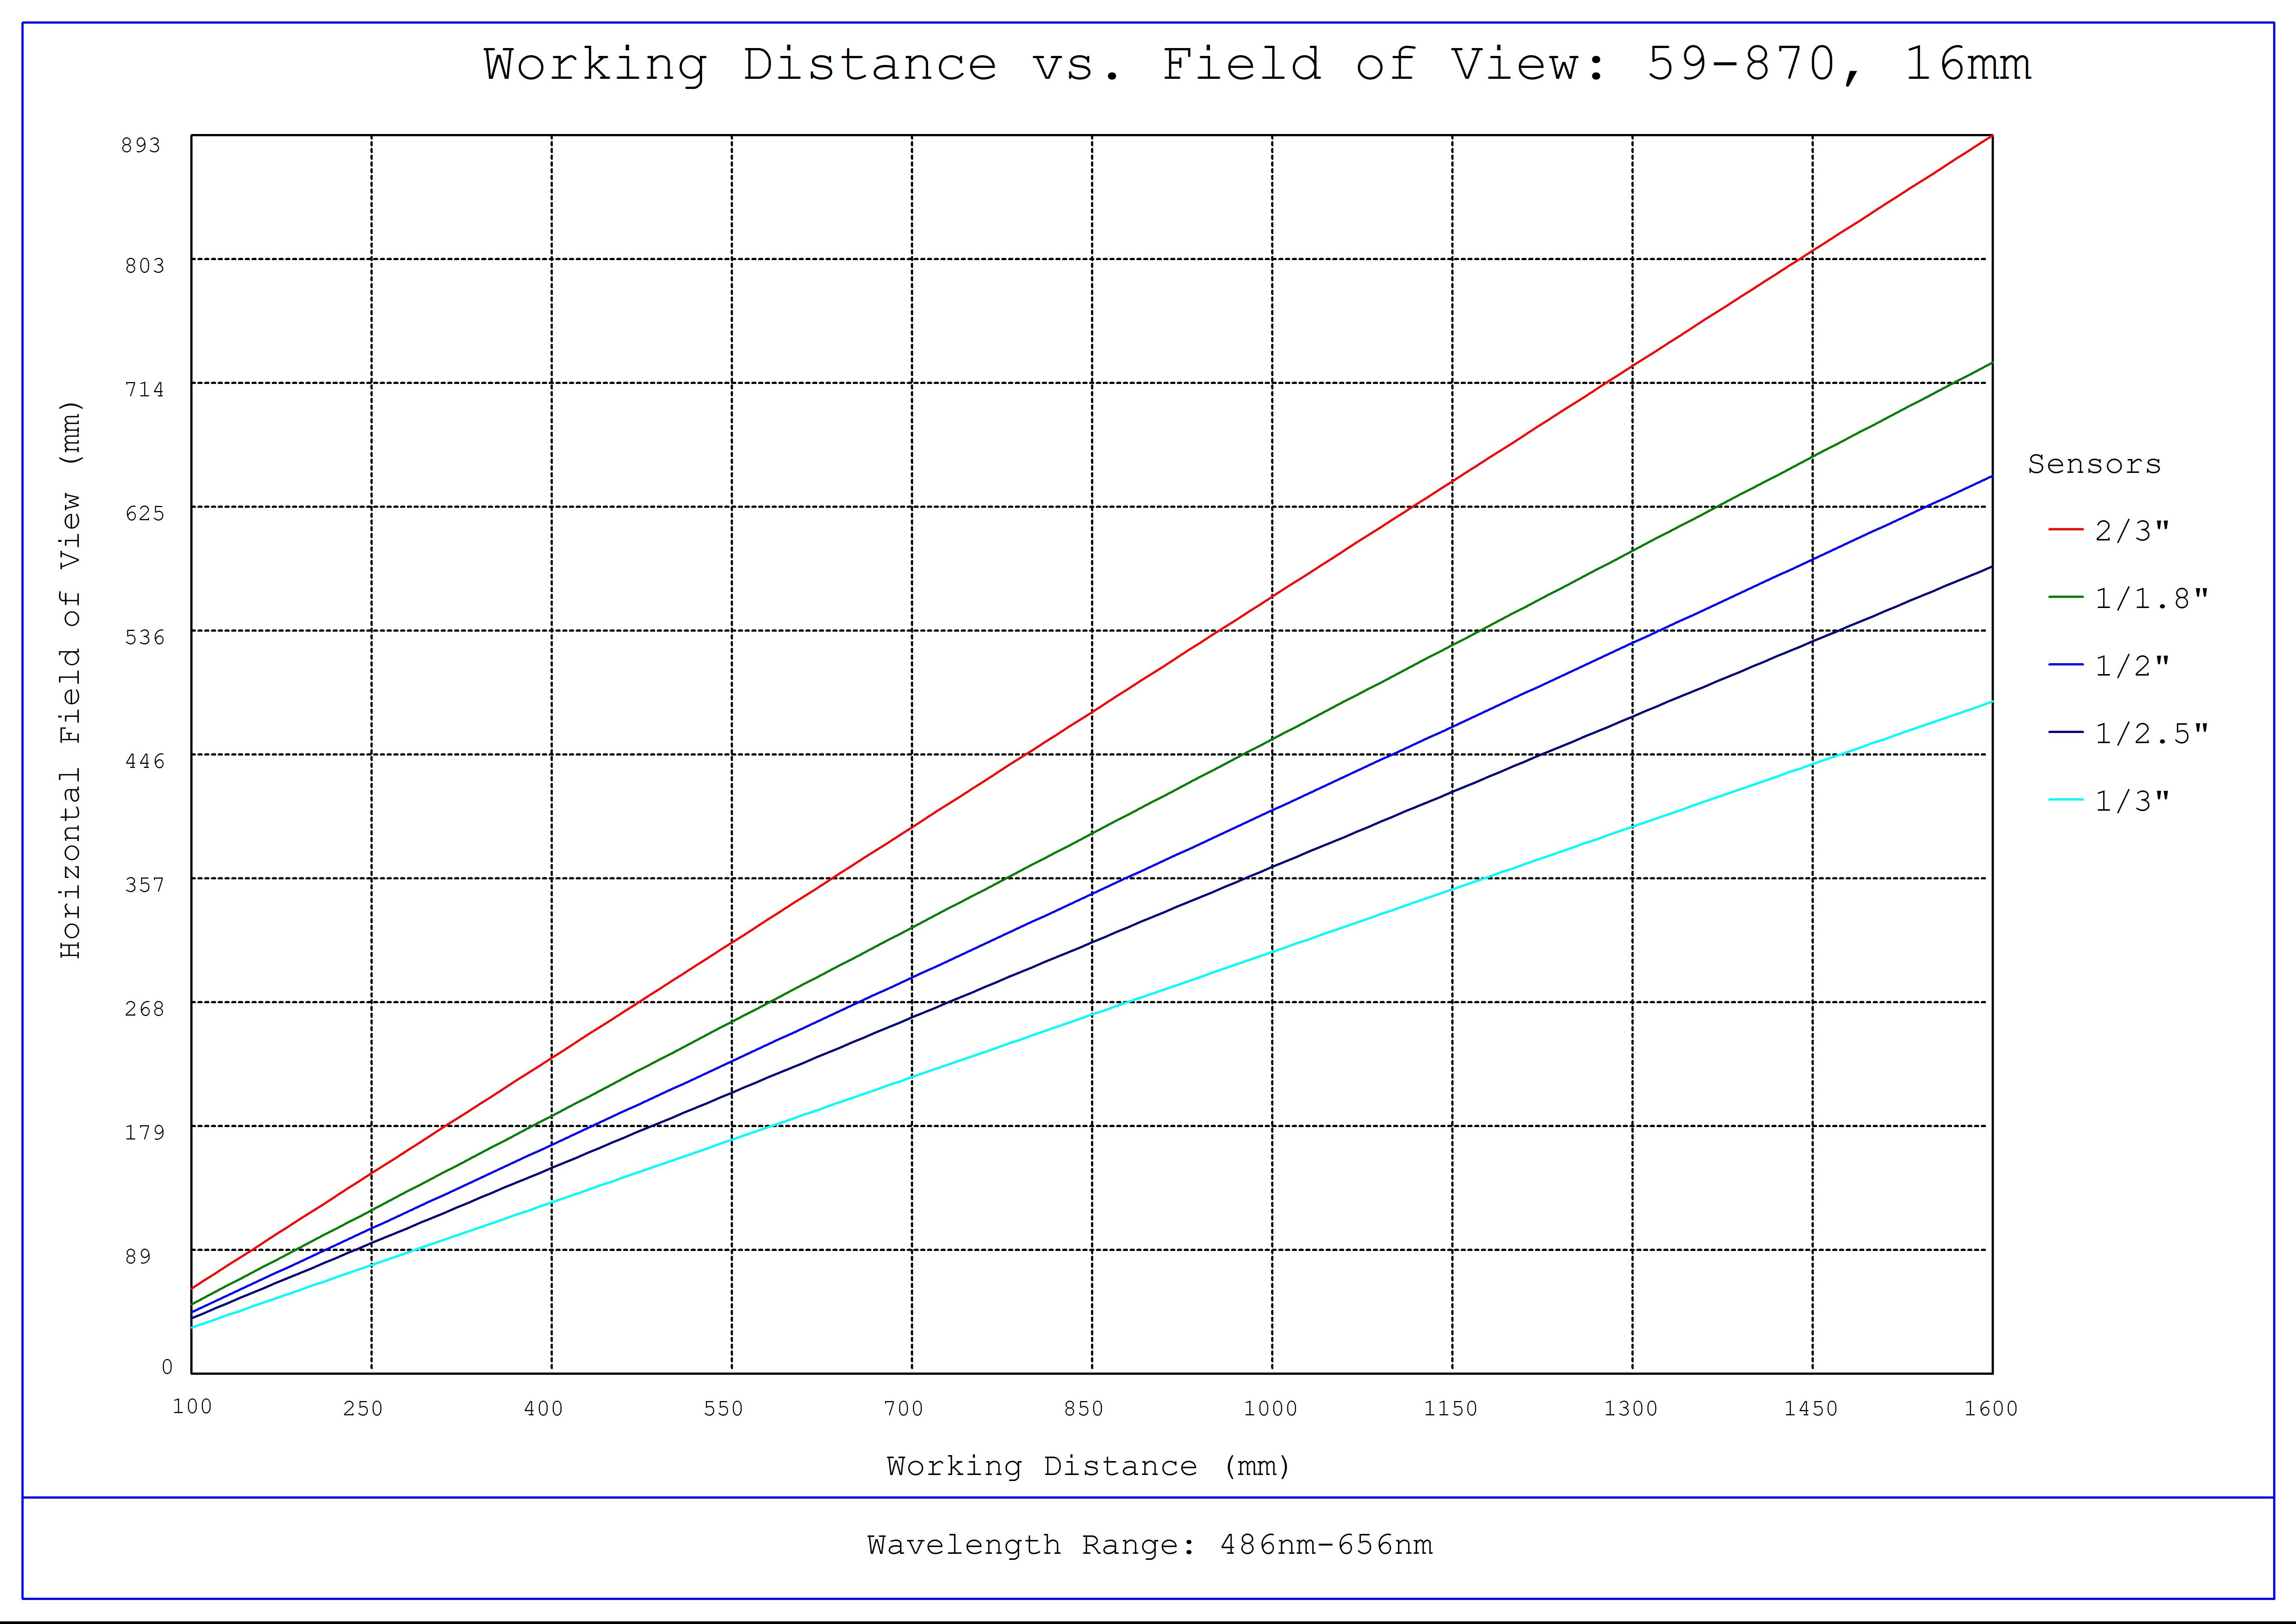 #59-870, 16mm C Series Fixed Focal Length Lens, Working Distance versus Field of View Plot